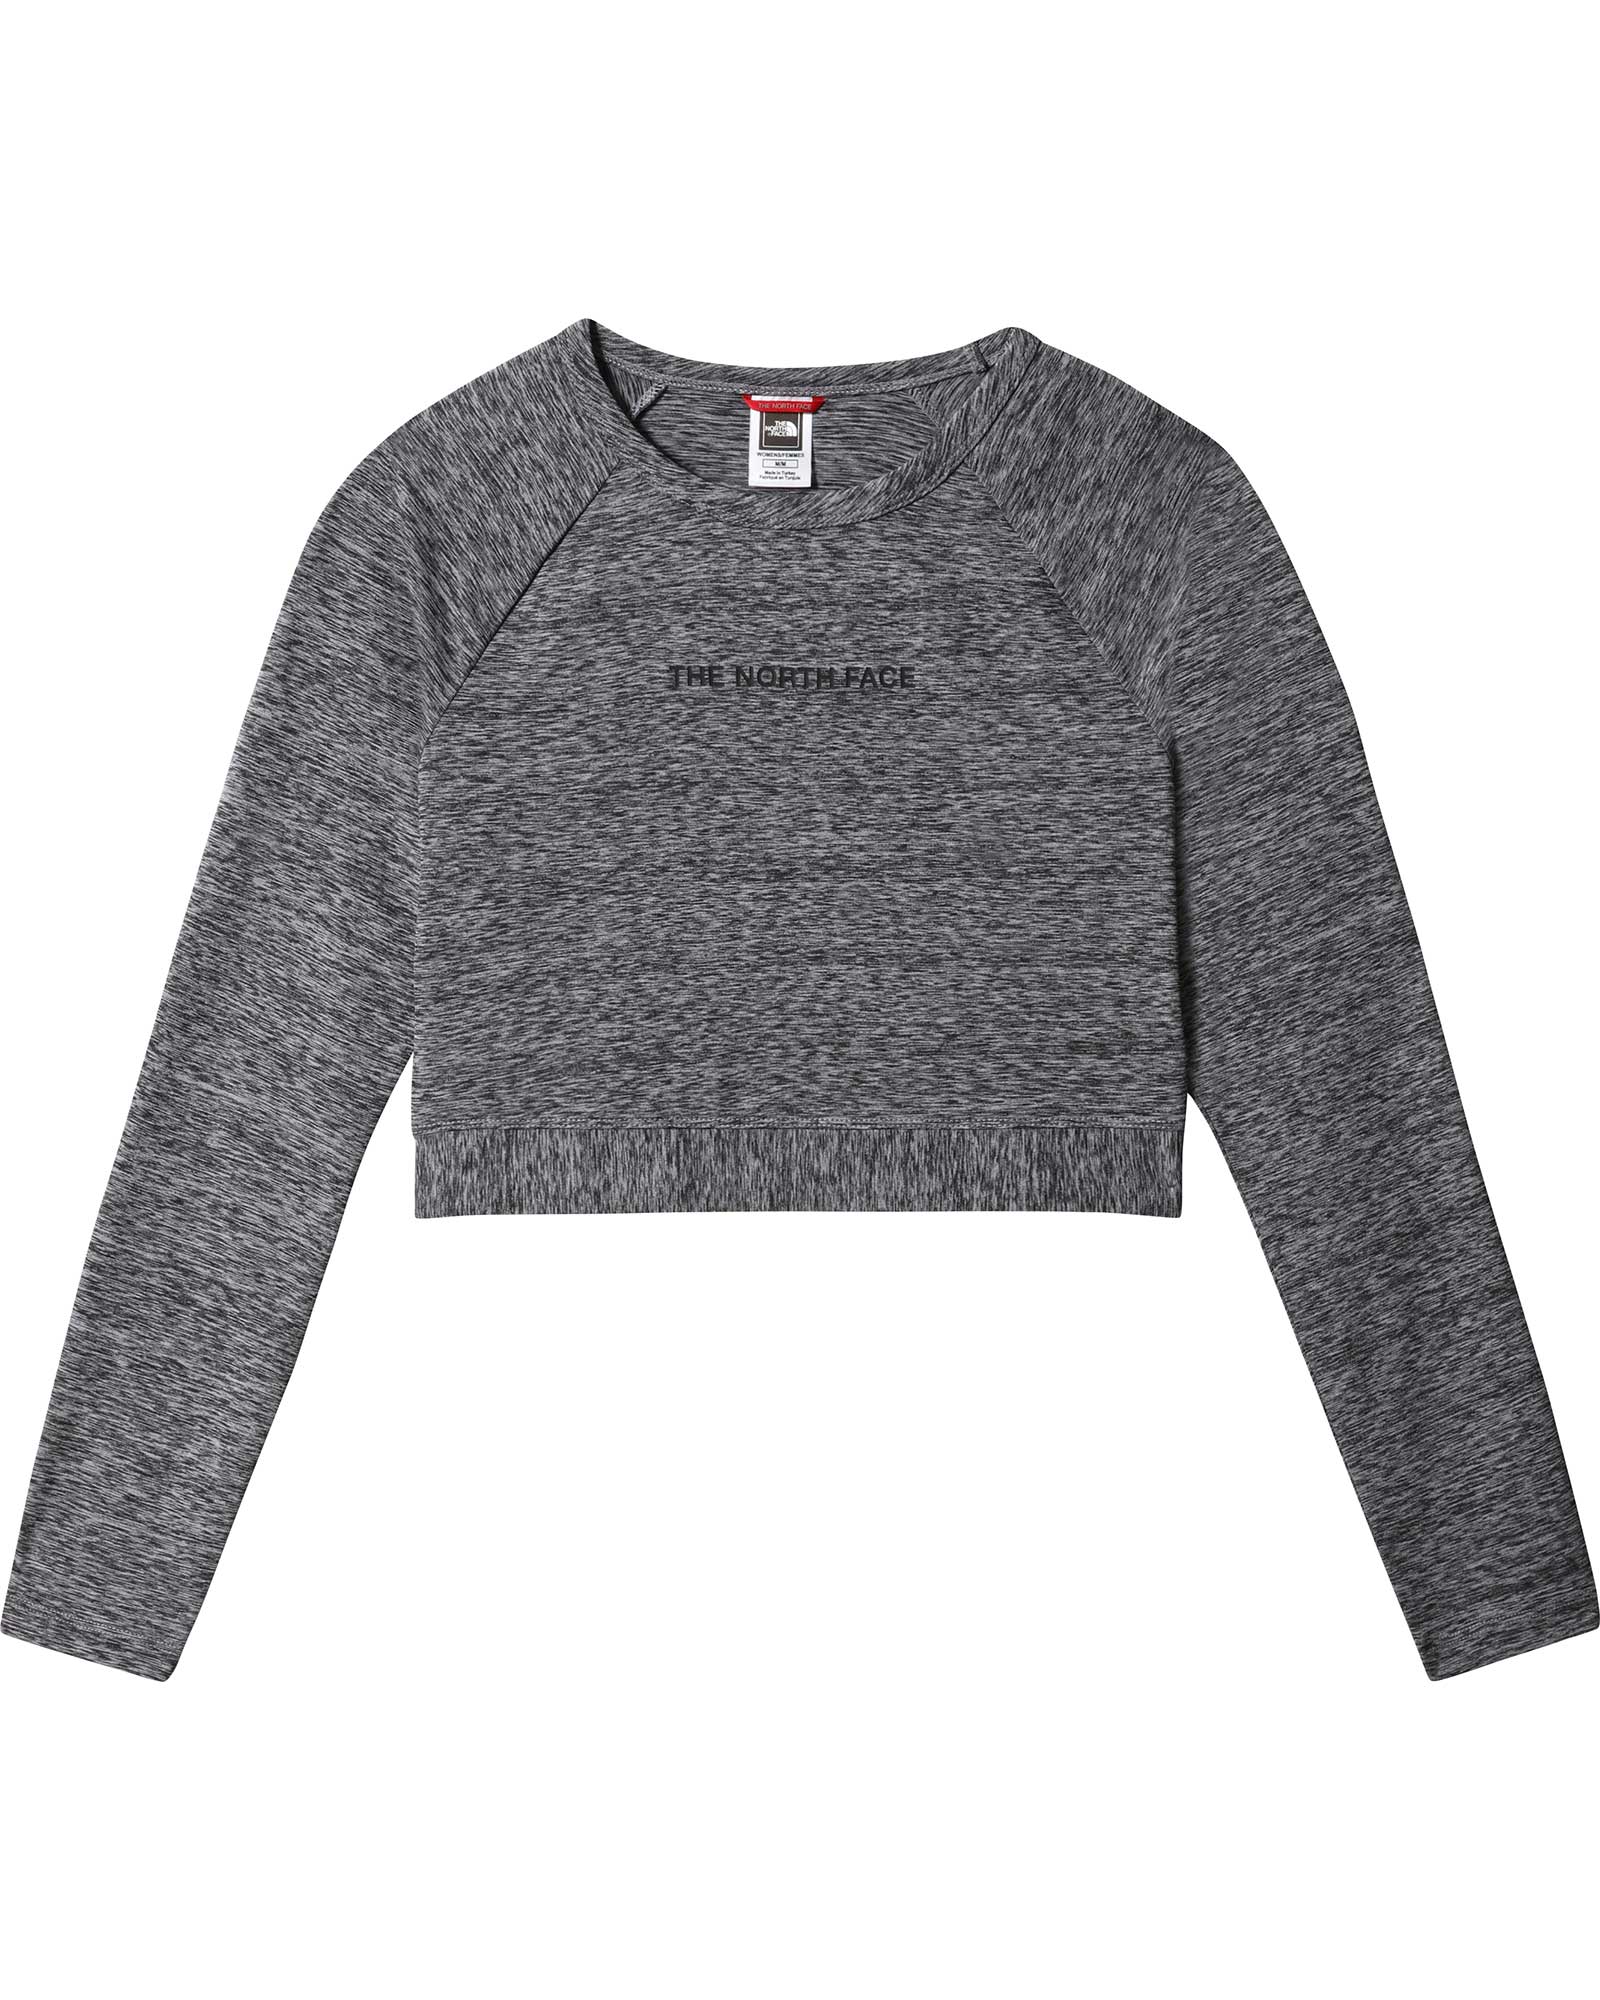 The North Face Stretchy Crop Womens Long Sleeve T-shirt